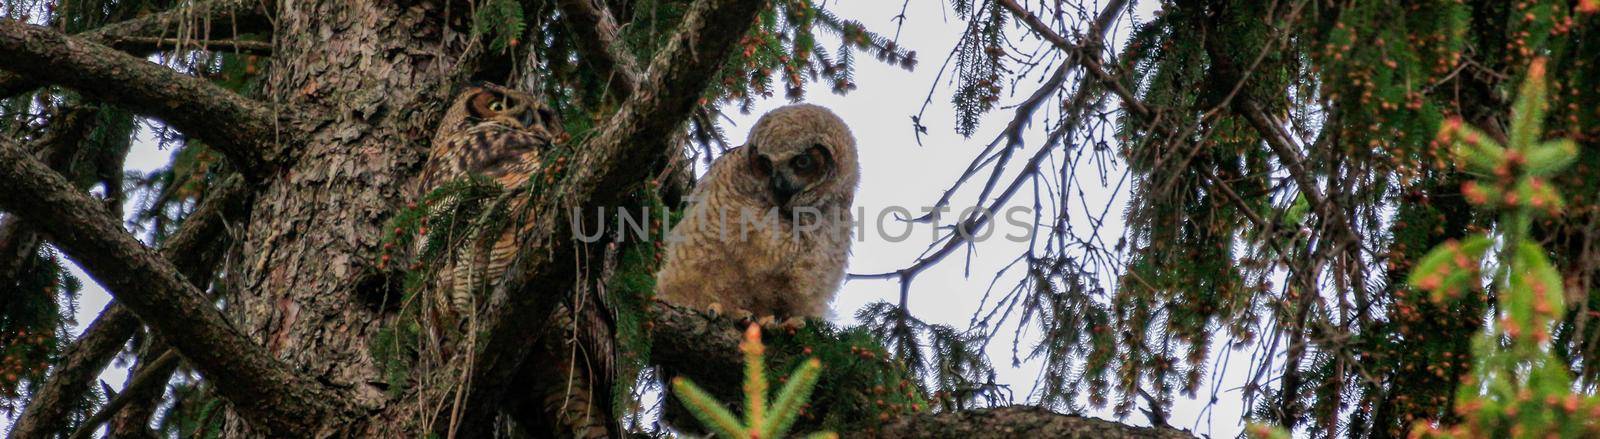 A young great horned owlet with their mother in a tree by mynewturtle1